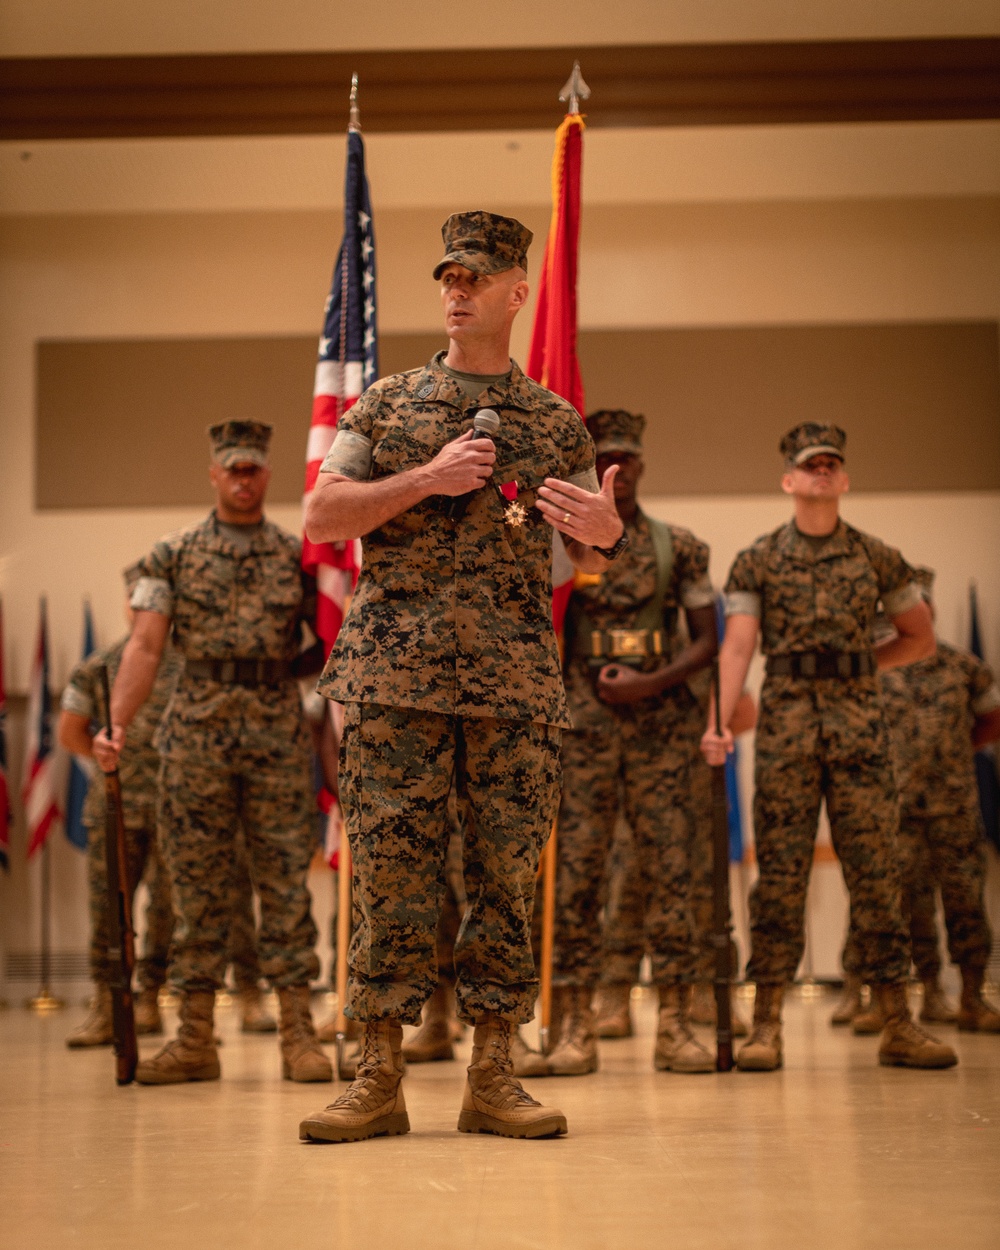 DVIDS - Images Bn, H&S relieved, MCIPAC 12 - leader Anderson appointed new senior of SgtMaj of enlisted 15] SgtMaj Drechsler [Image